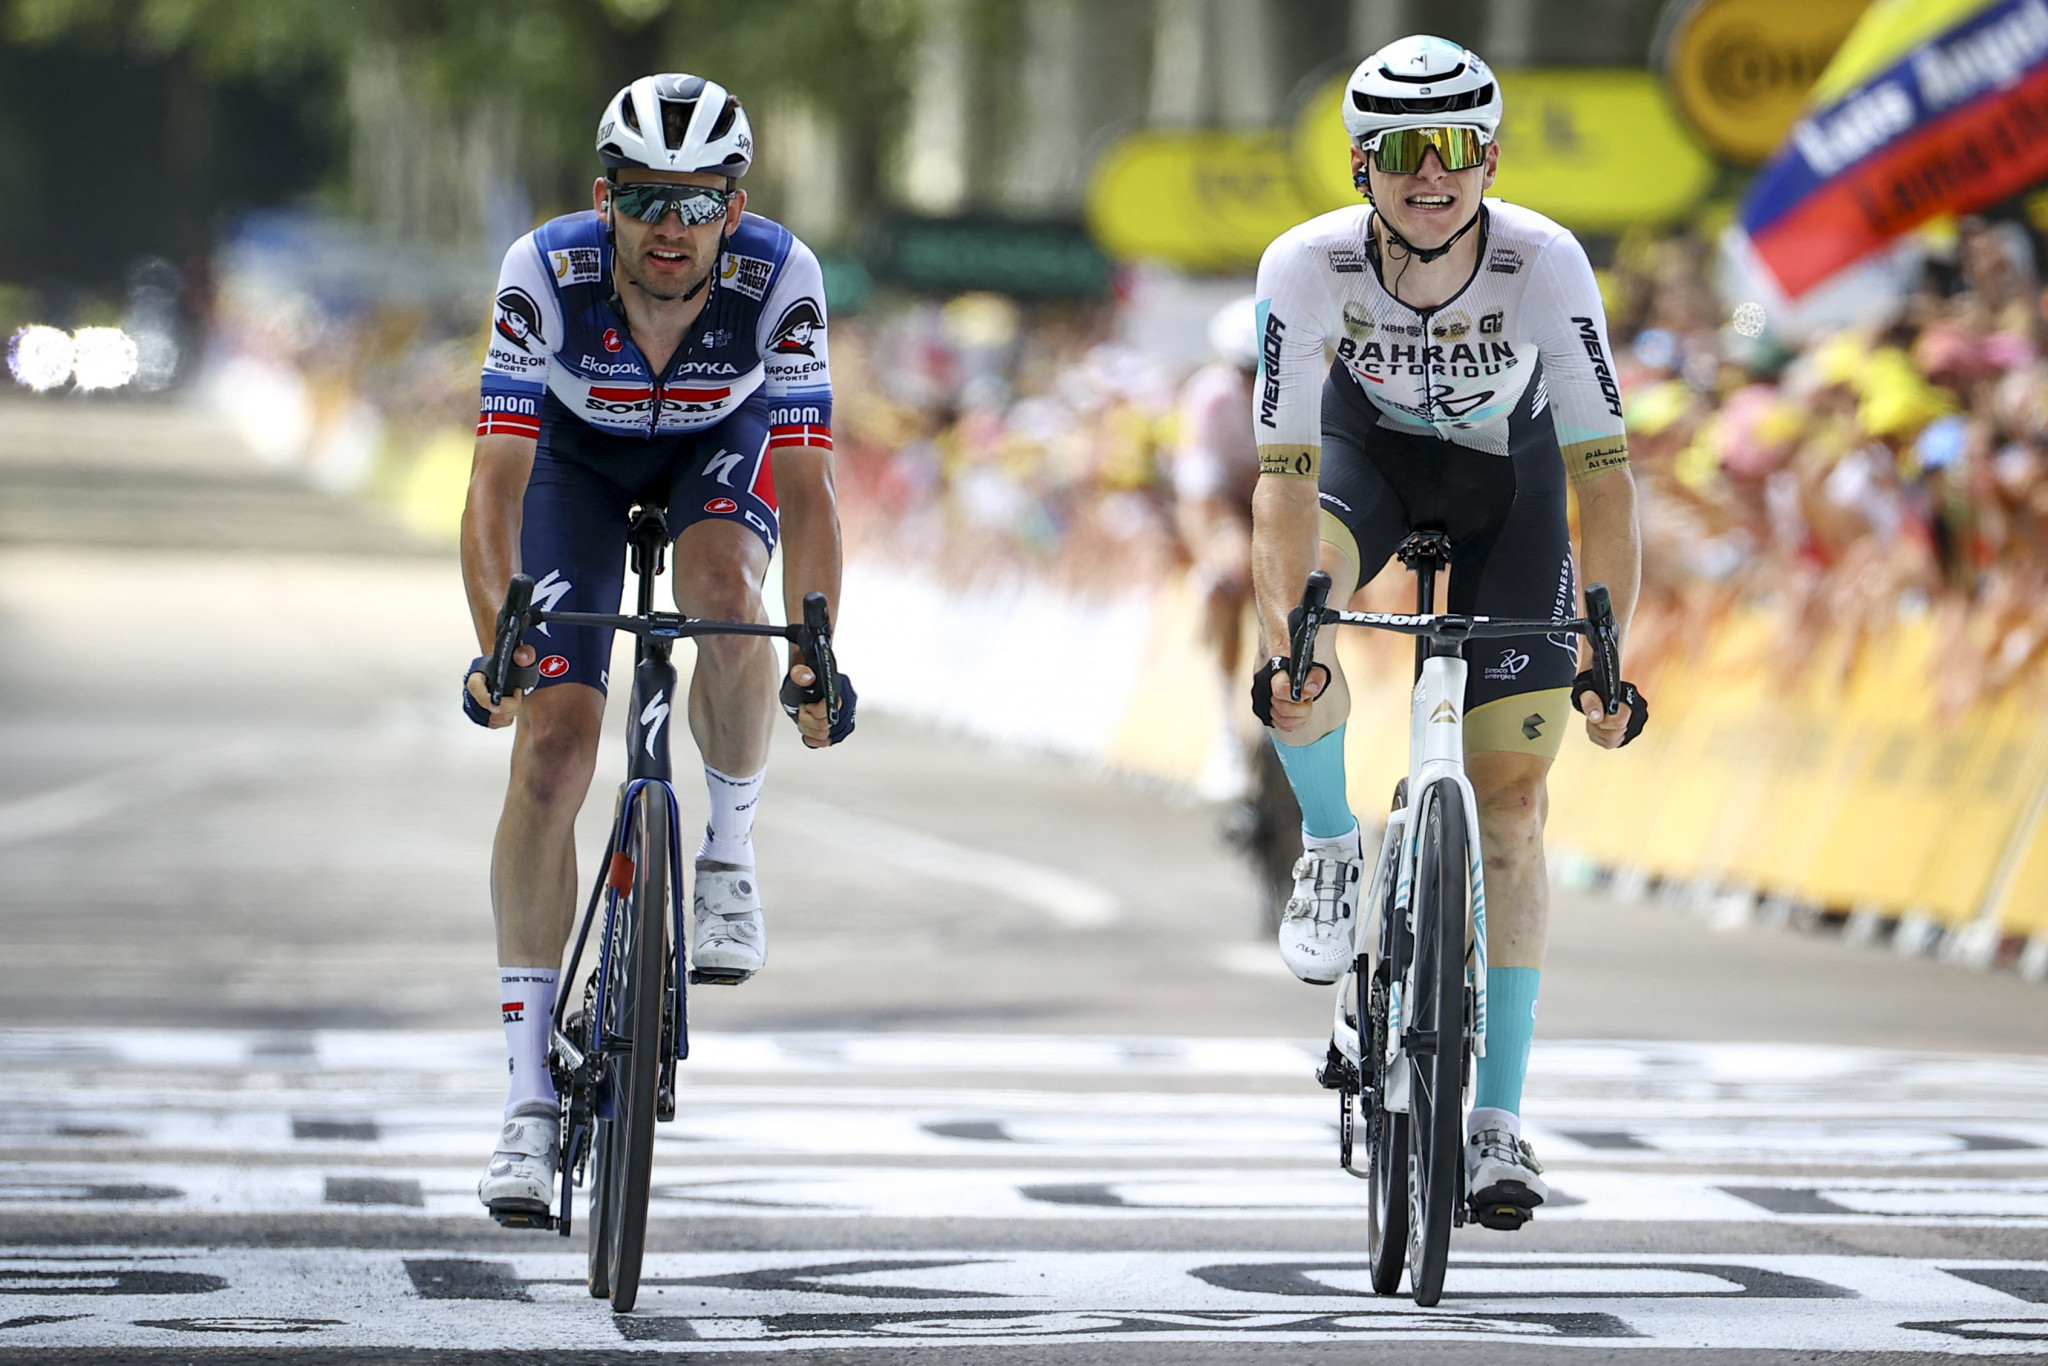 Mohorič triumphs over Asgreen in photo finish on chaotic stage 19 of Tour de France